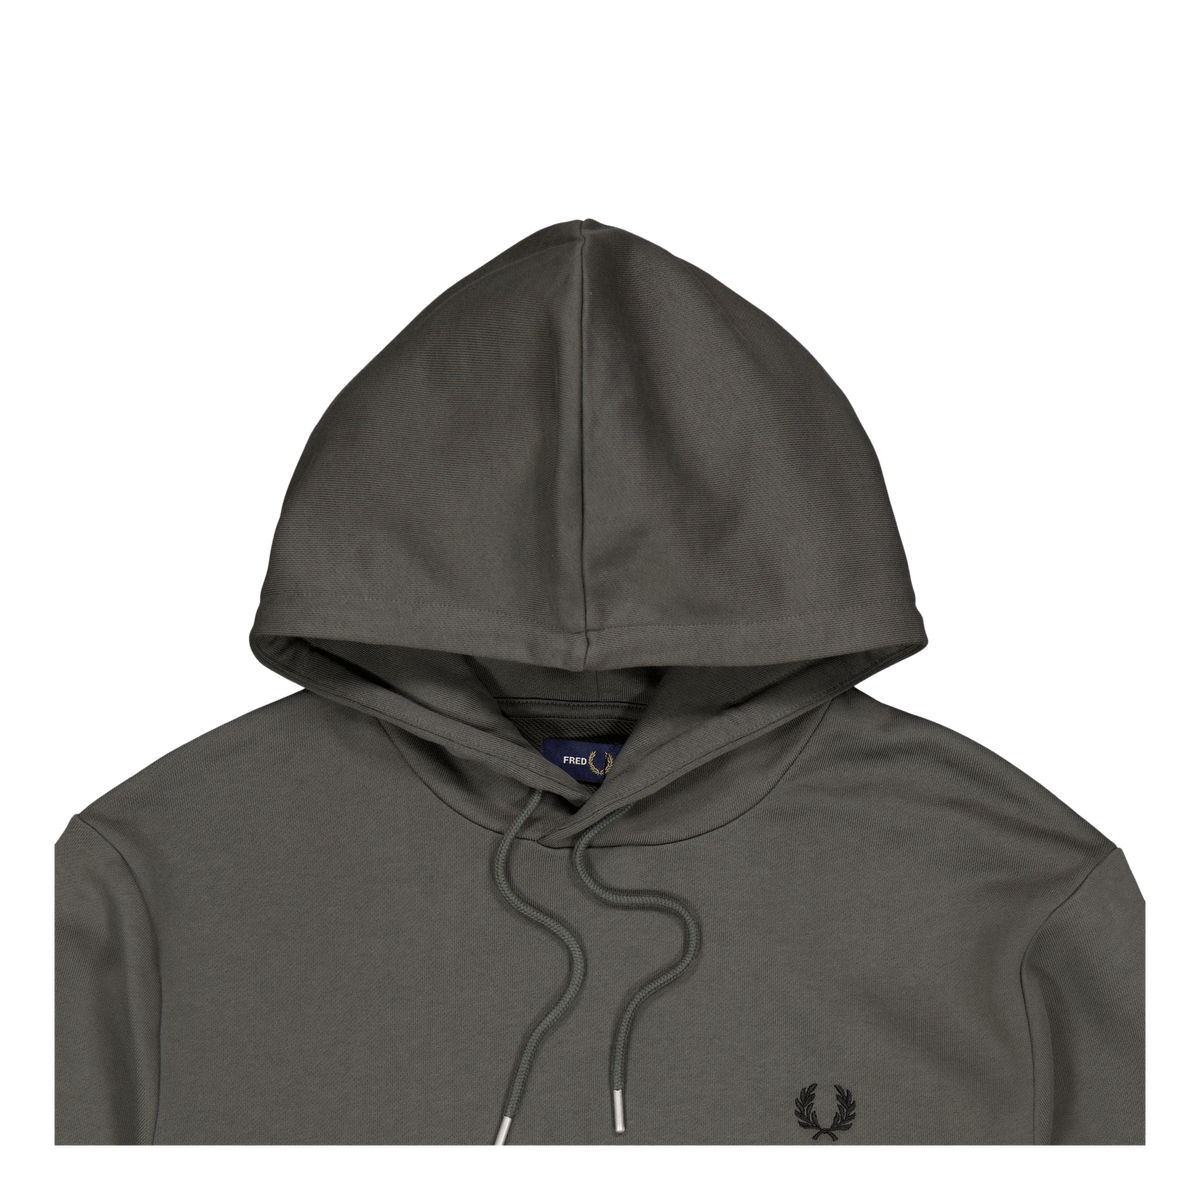 Fred Perry Tipped Hooded Sweatshirt 638